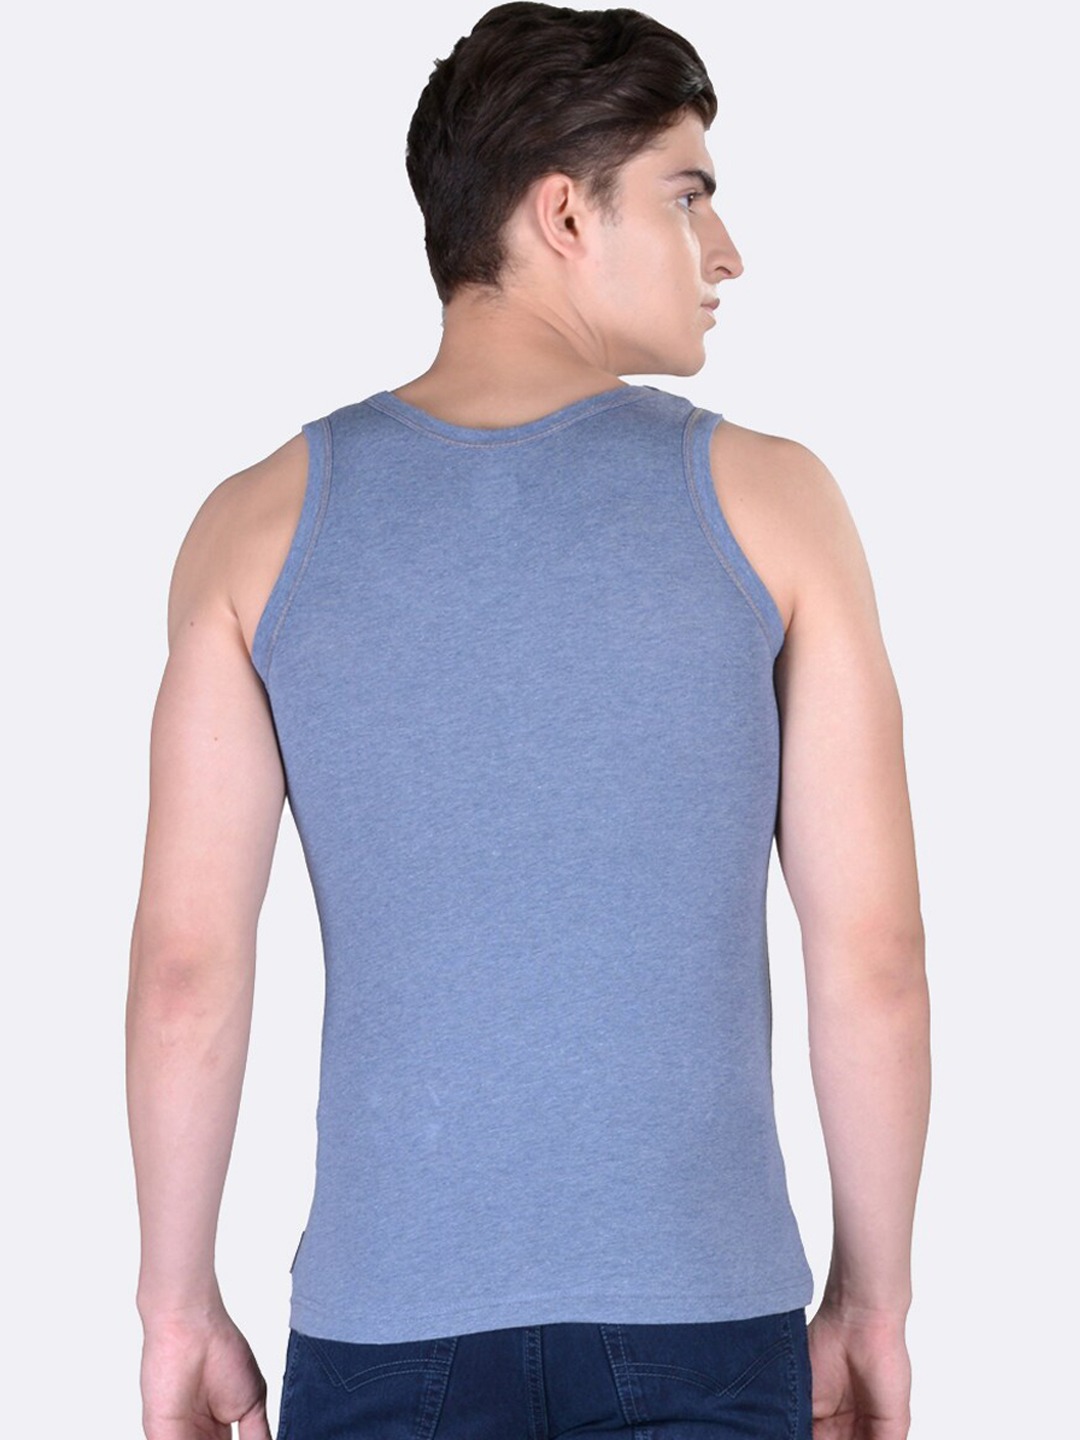 Clothing Innerwear Vests | Force NXT Men Pack Of 3 Blue Cotton Innerwear Vests - UH06018